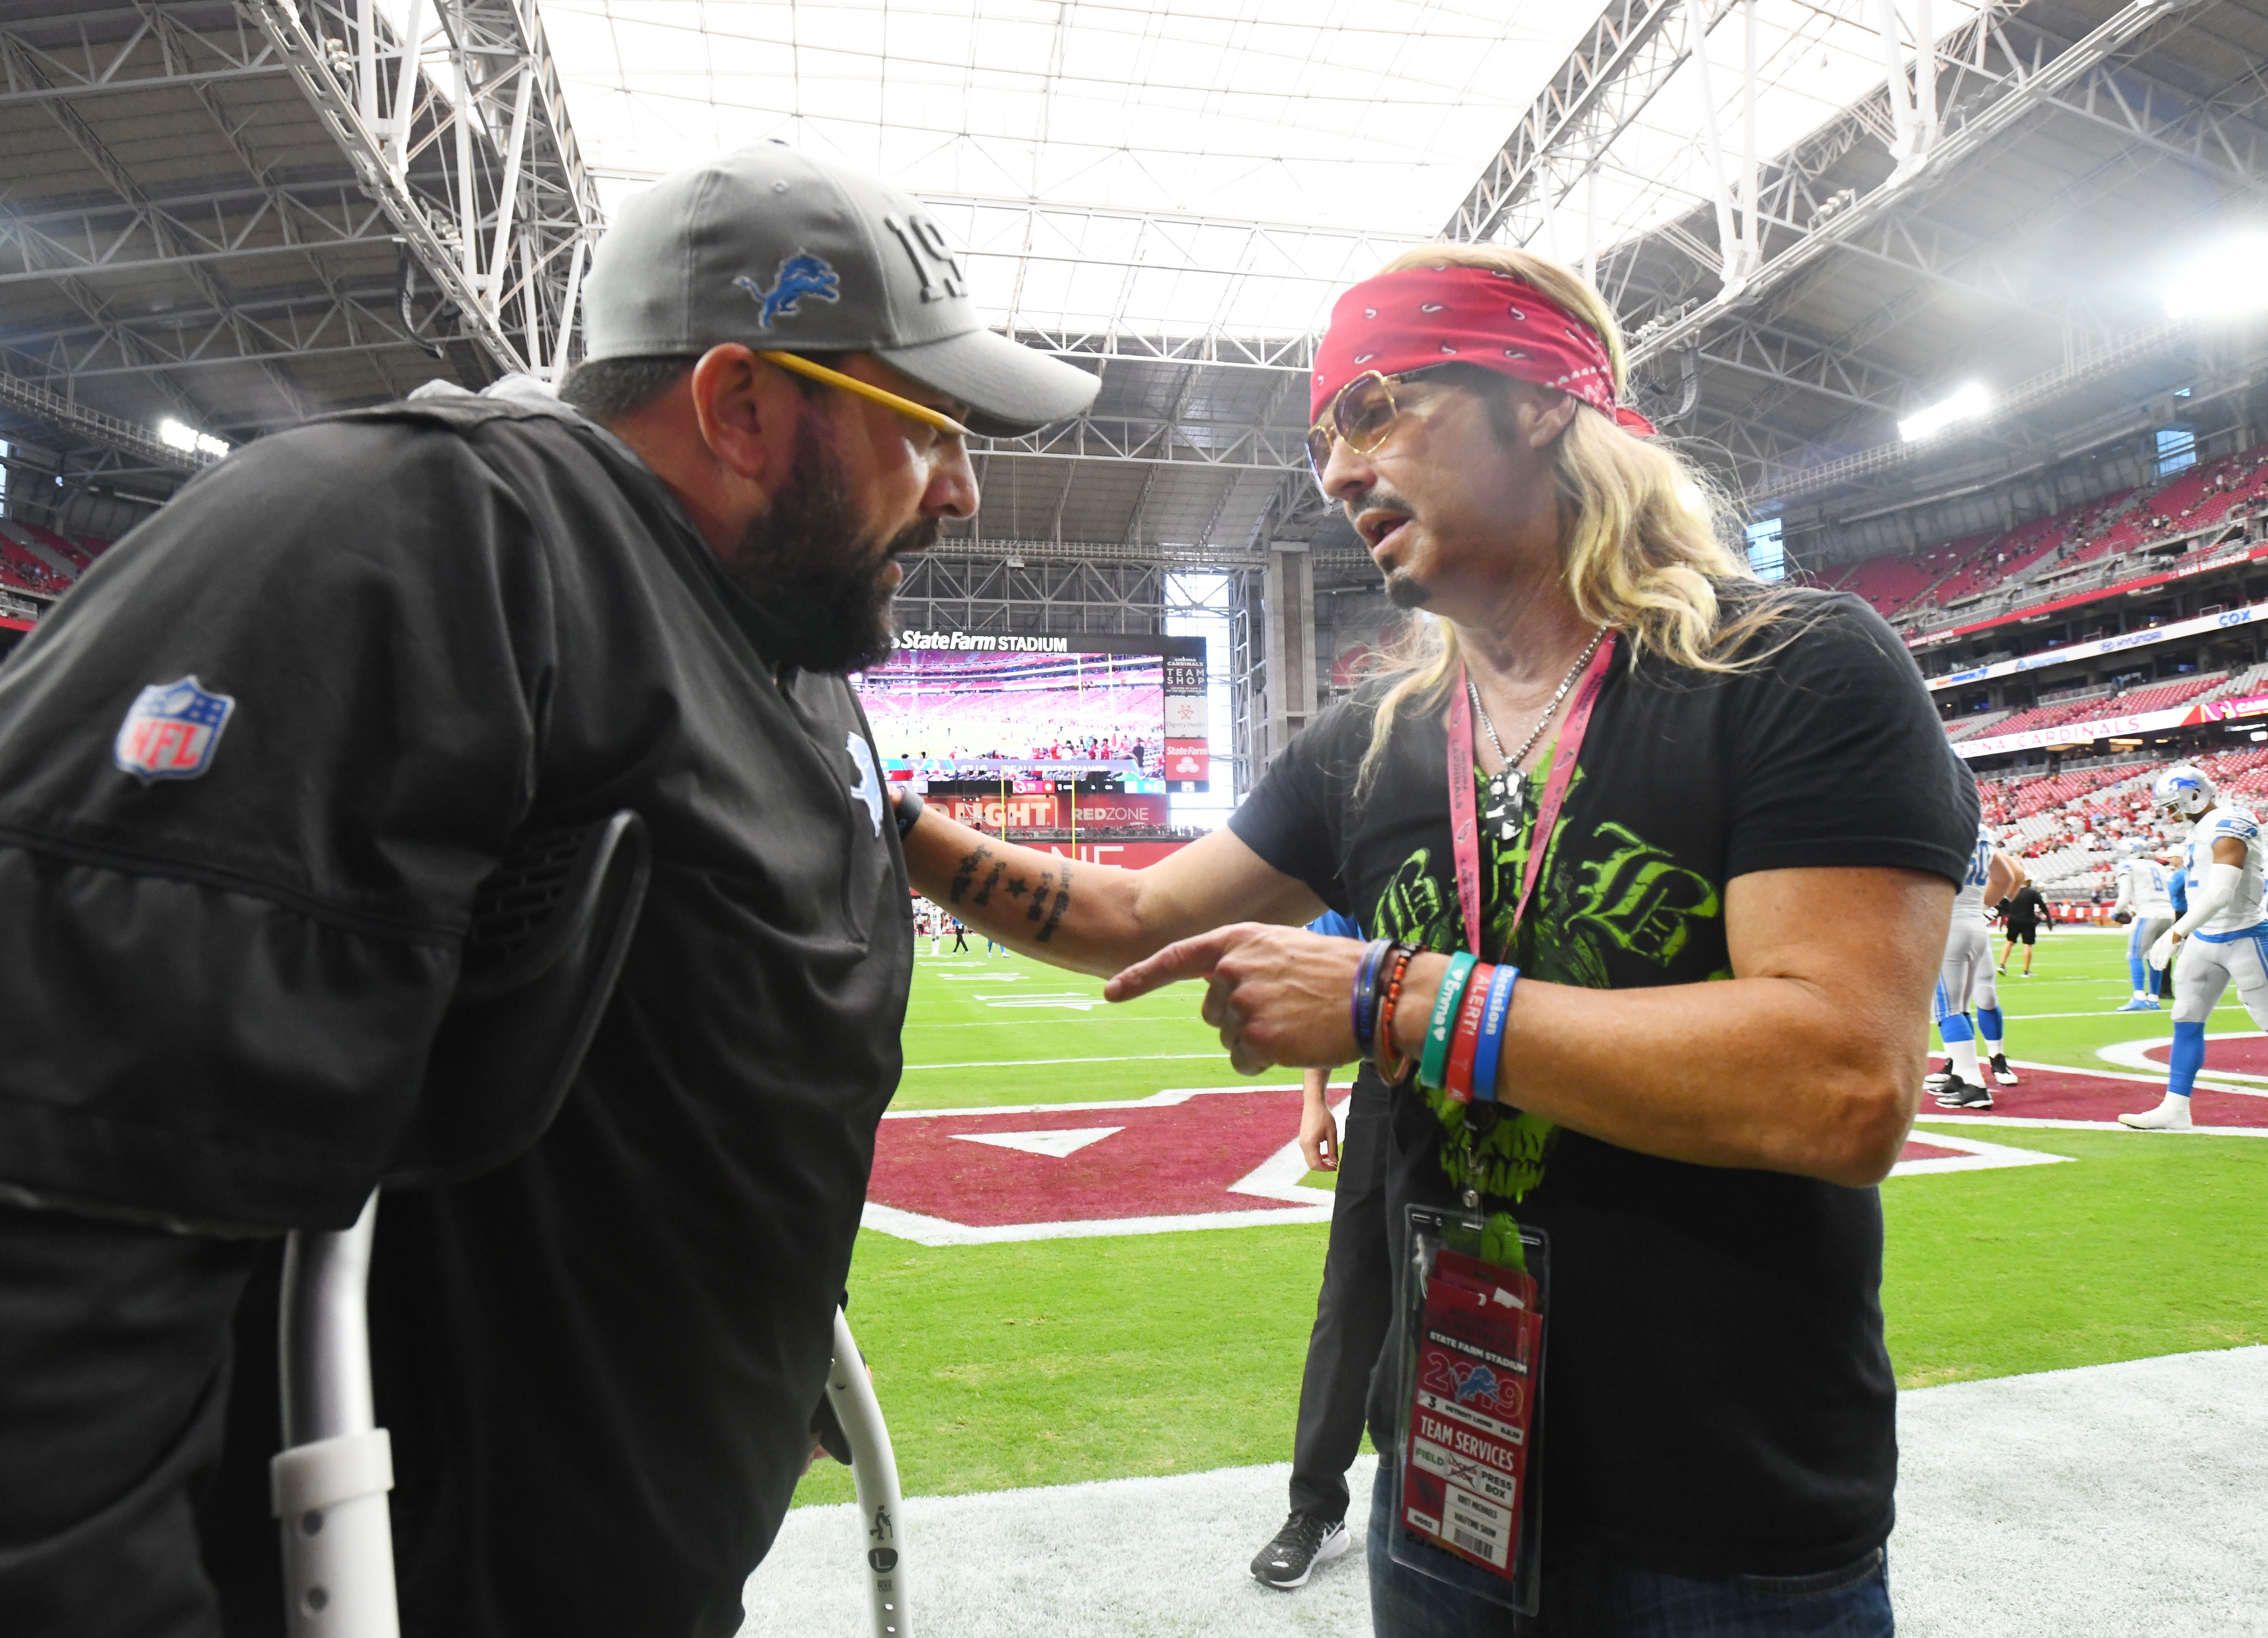 Singer Bret Michaels with the group Poison visits the sidelines in Phoenix, signing autographs and visiting with Detroit Lions head coach Matt Patricia before the game on September 8, 2019.